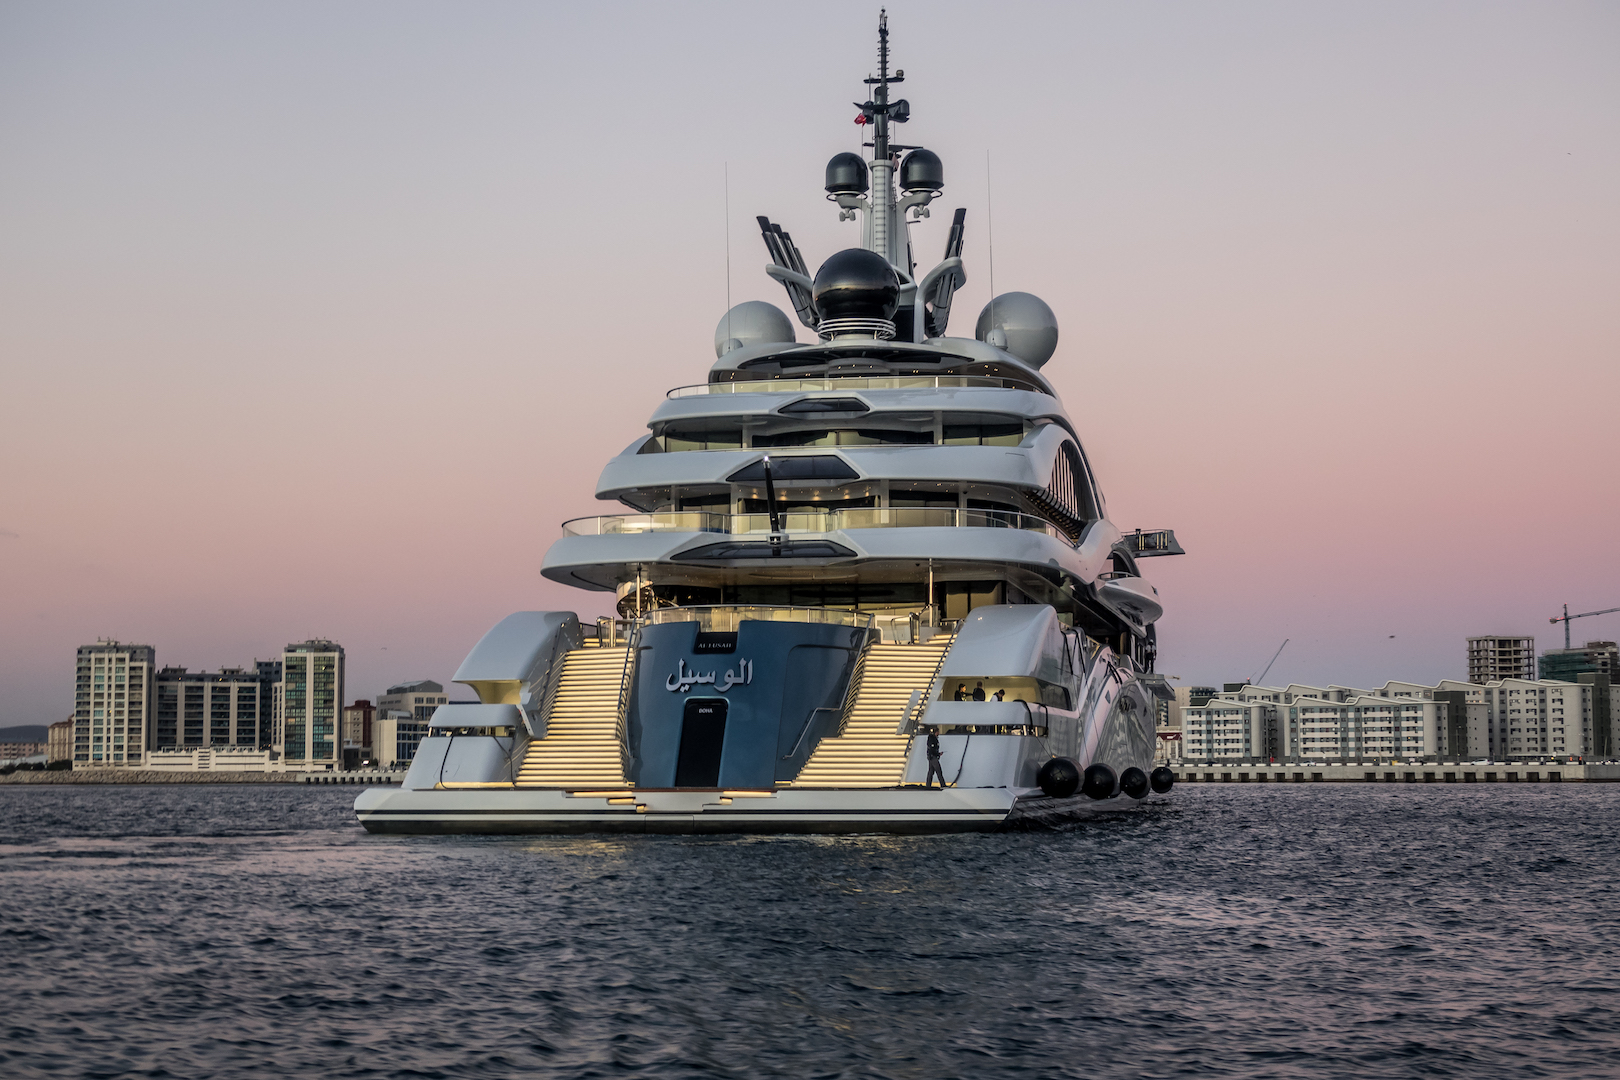 azzam: the £400m, 590ft super-yacht that's going to put